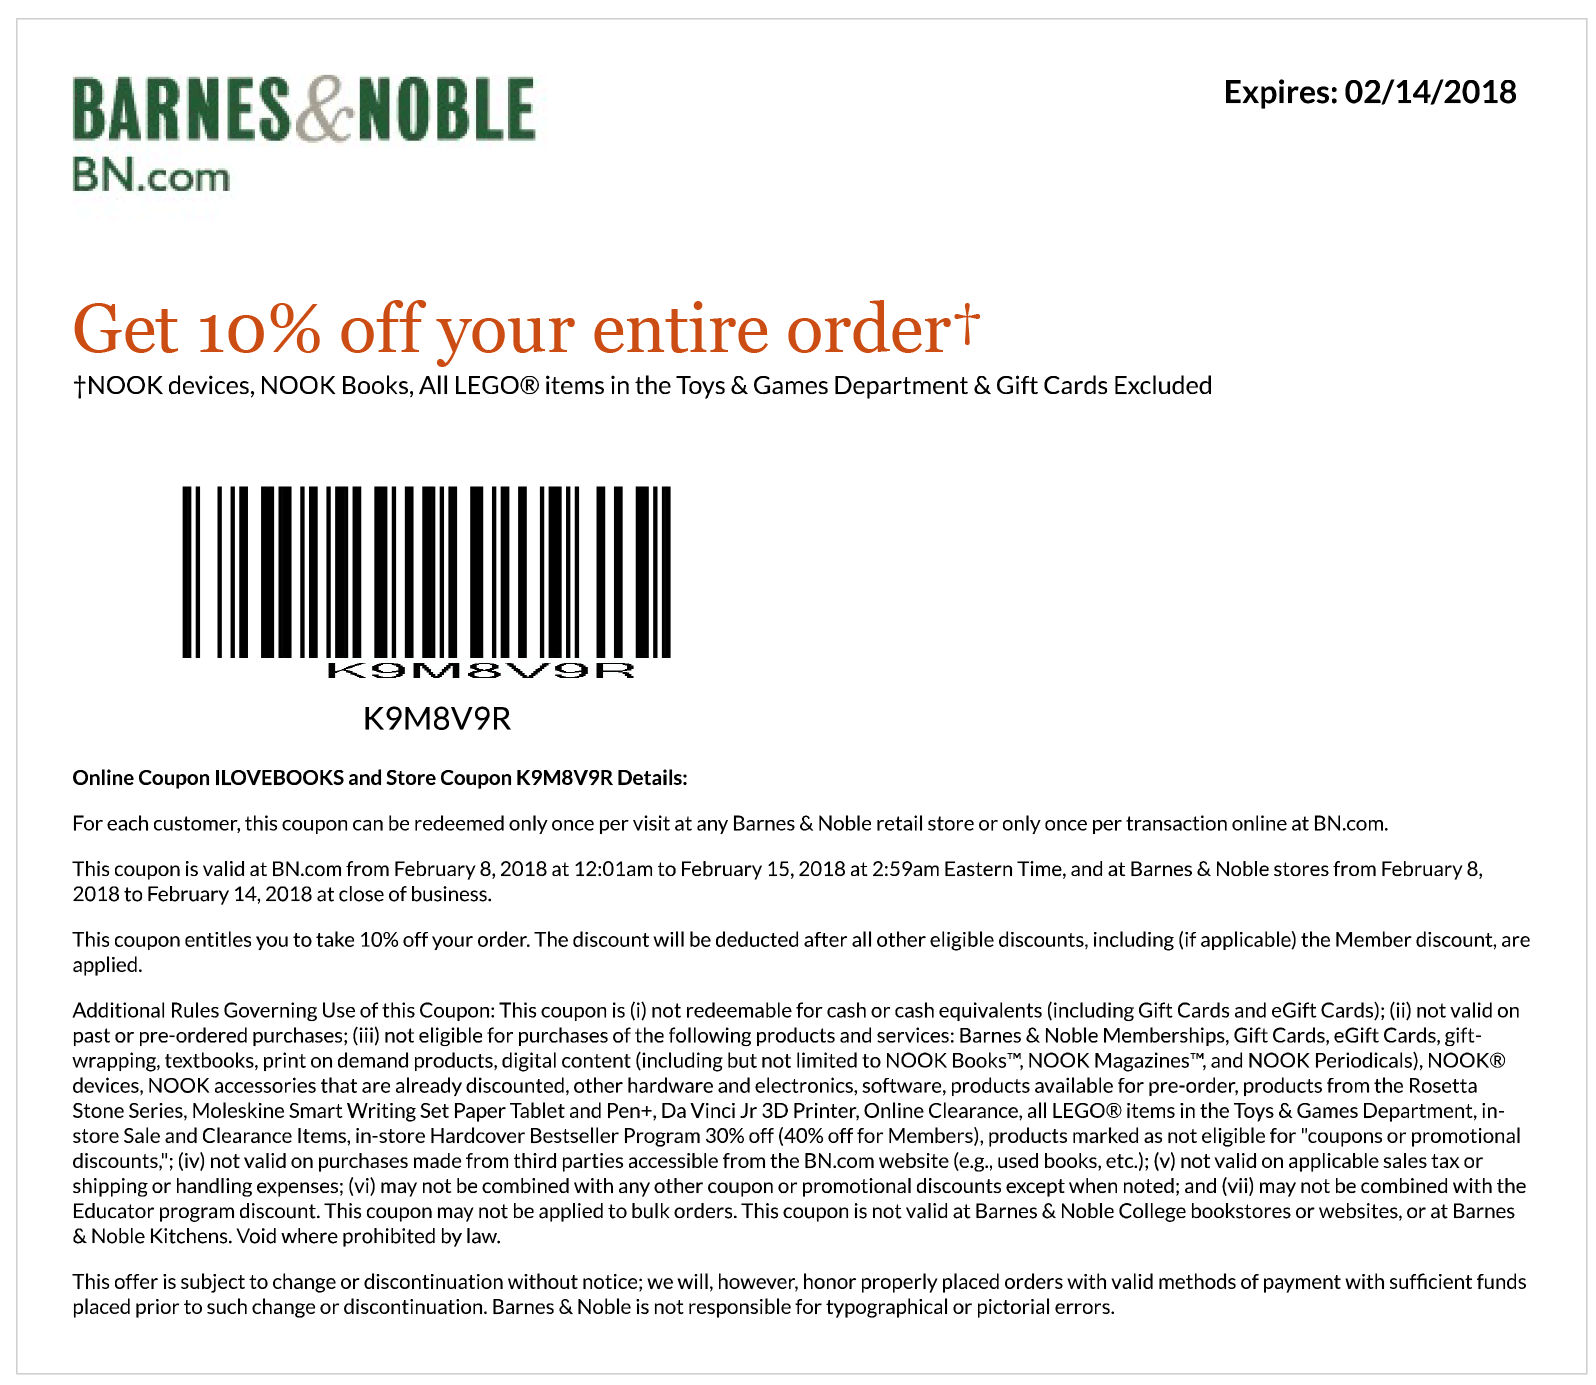 lego online coupon